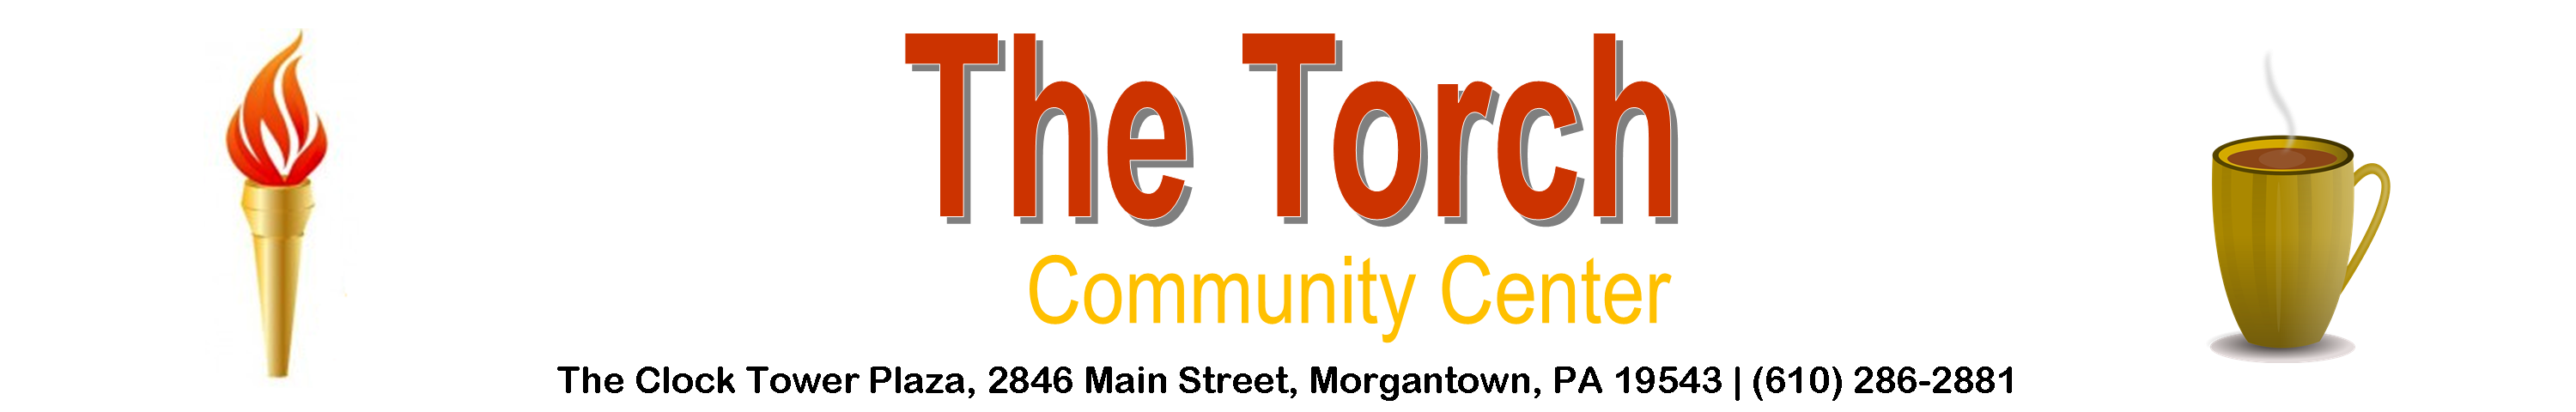 The Torch Community Center